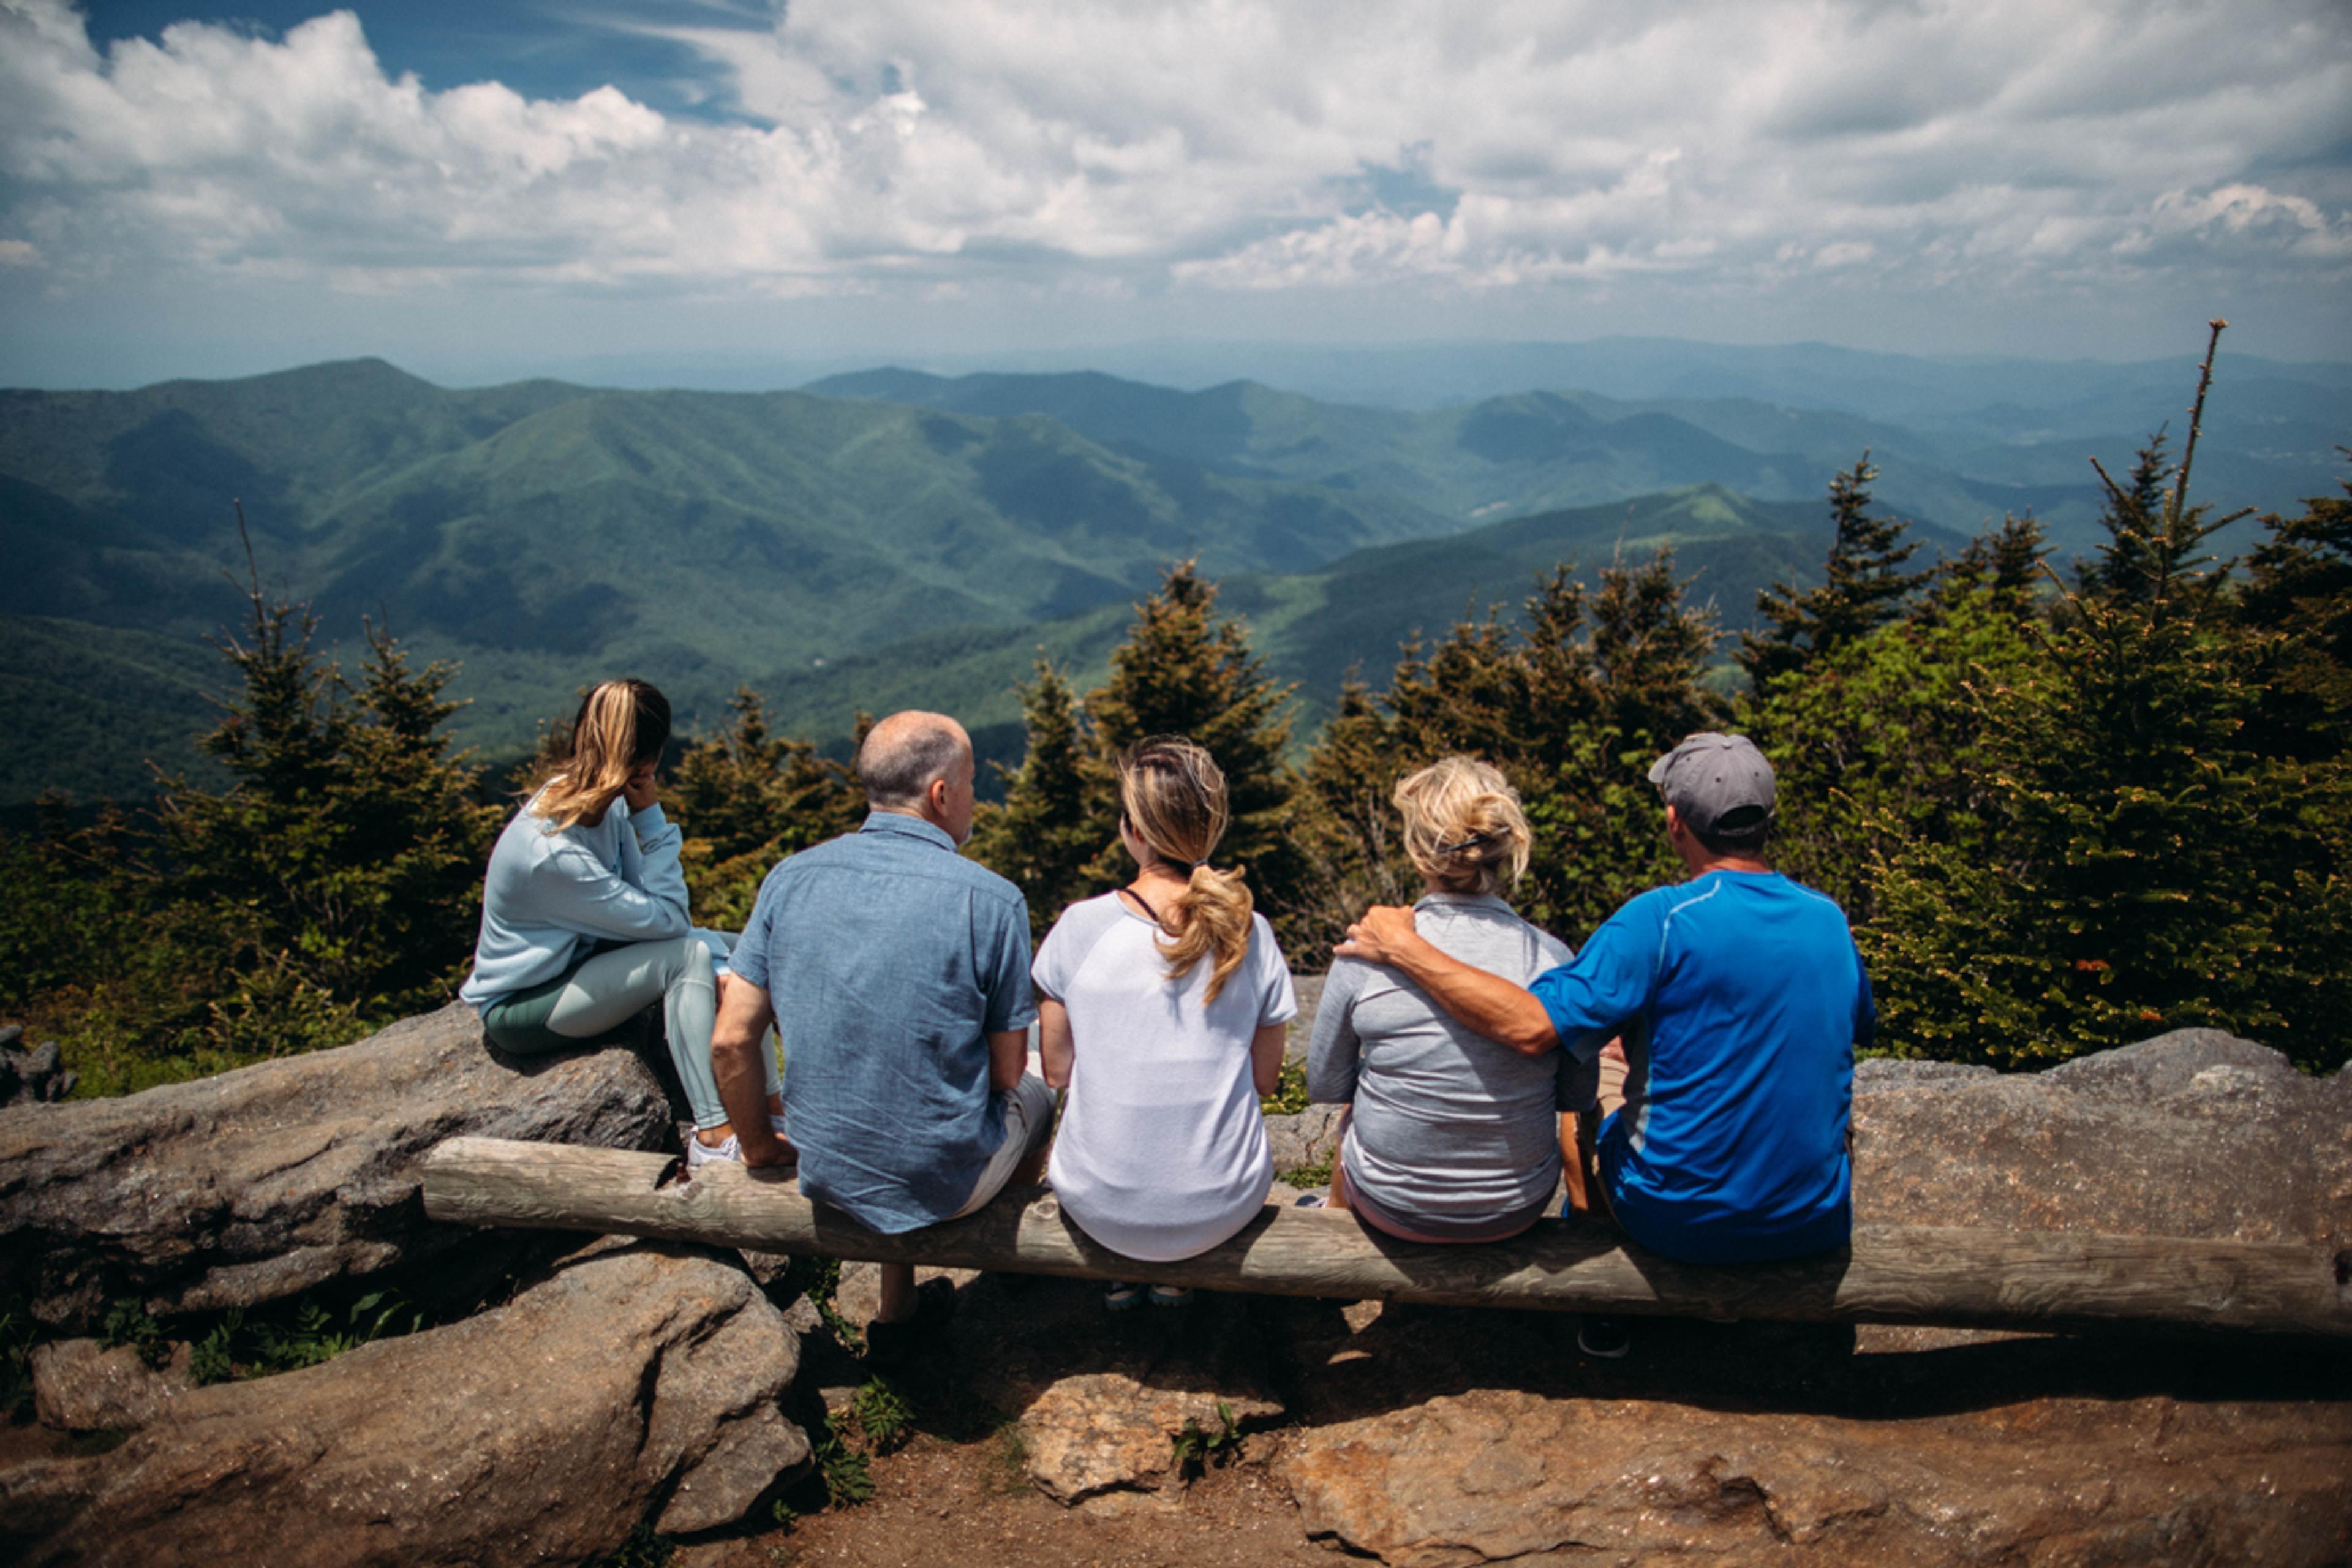 A family siting on a mountaintop, backs to the camera, looking out on a mountain range.